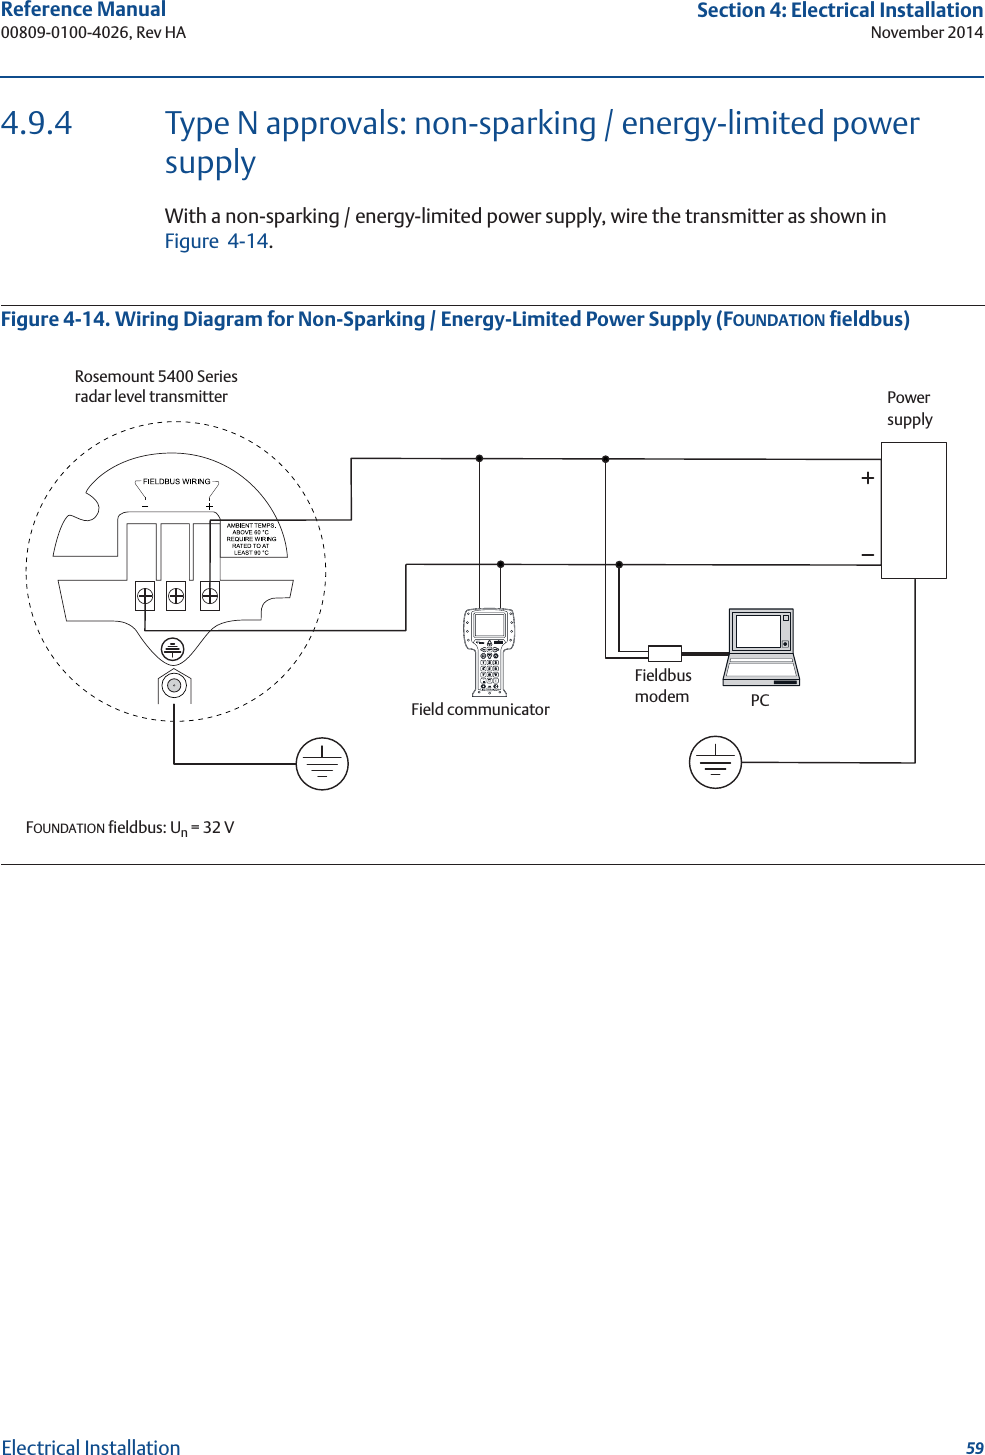 59Reference Manual 00809-0100-4026, Rev HASection 4: Electrical InstallationNovember 2014Electrical Installation4.9.4 Type N approvals: non-sparking / energy-limited power supplyWith a non-sparking / energy-limited power supply, wire the transmitter as shown in Figure 4-14.Figure 4-14. Wiring Diagram for Non-Sparking / Energy-Limited Power Supply (FOUNDATION fieldbus) Rosemount 5400 Series radar level transmitterFOUNDATION fieldbus: Un = 32 VPowersupplyPCField communicatorFieldbusmodem